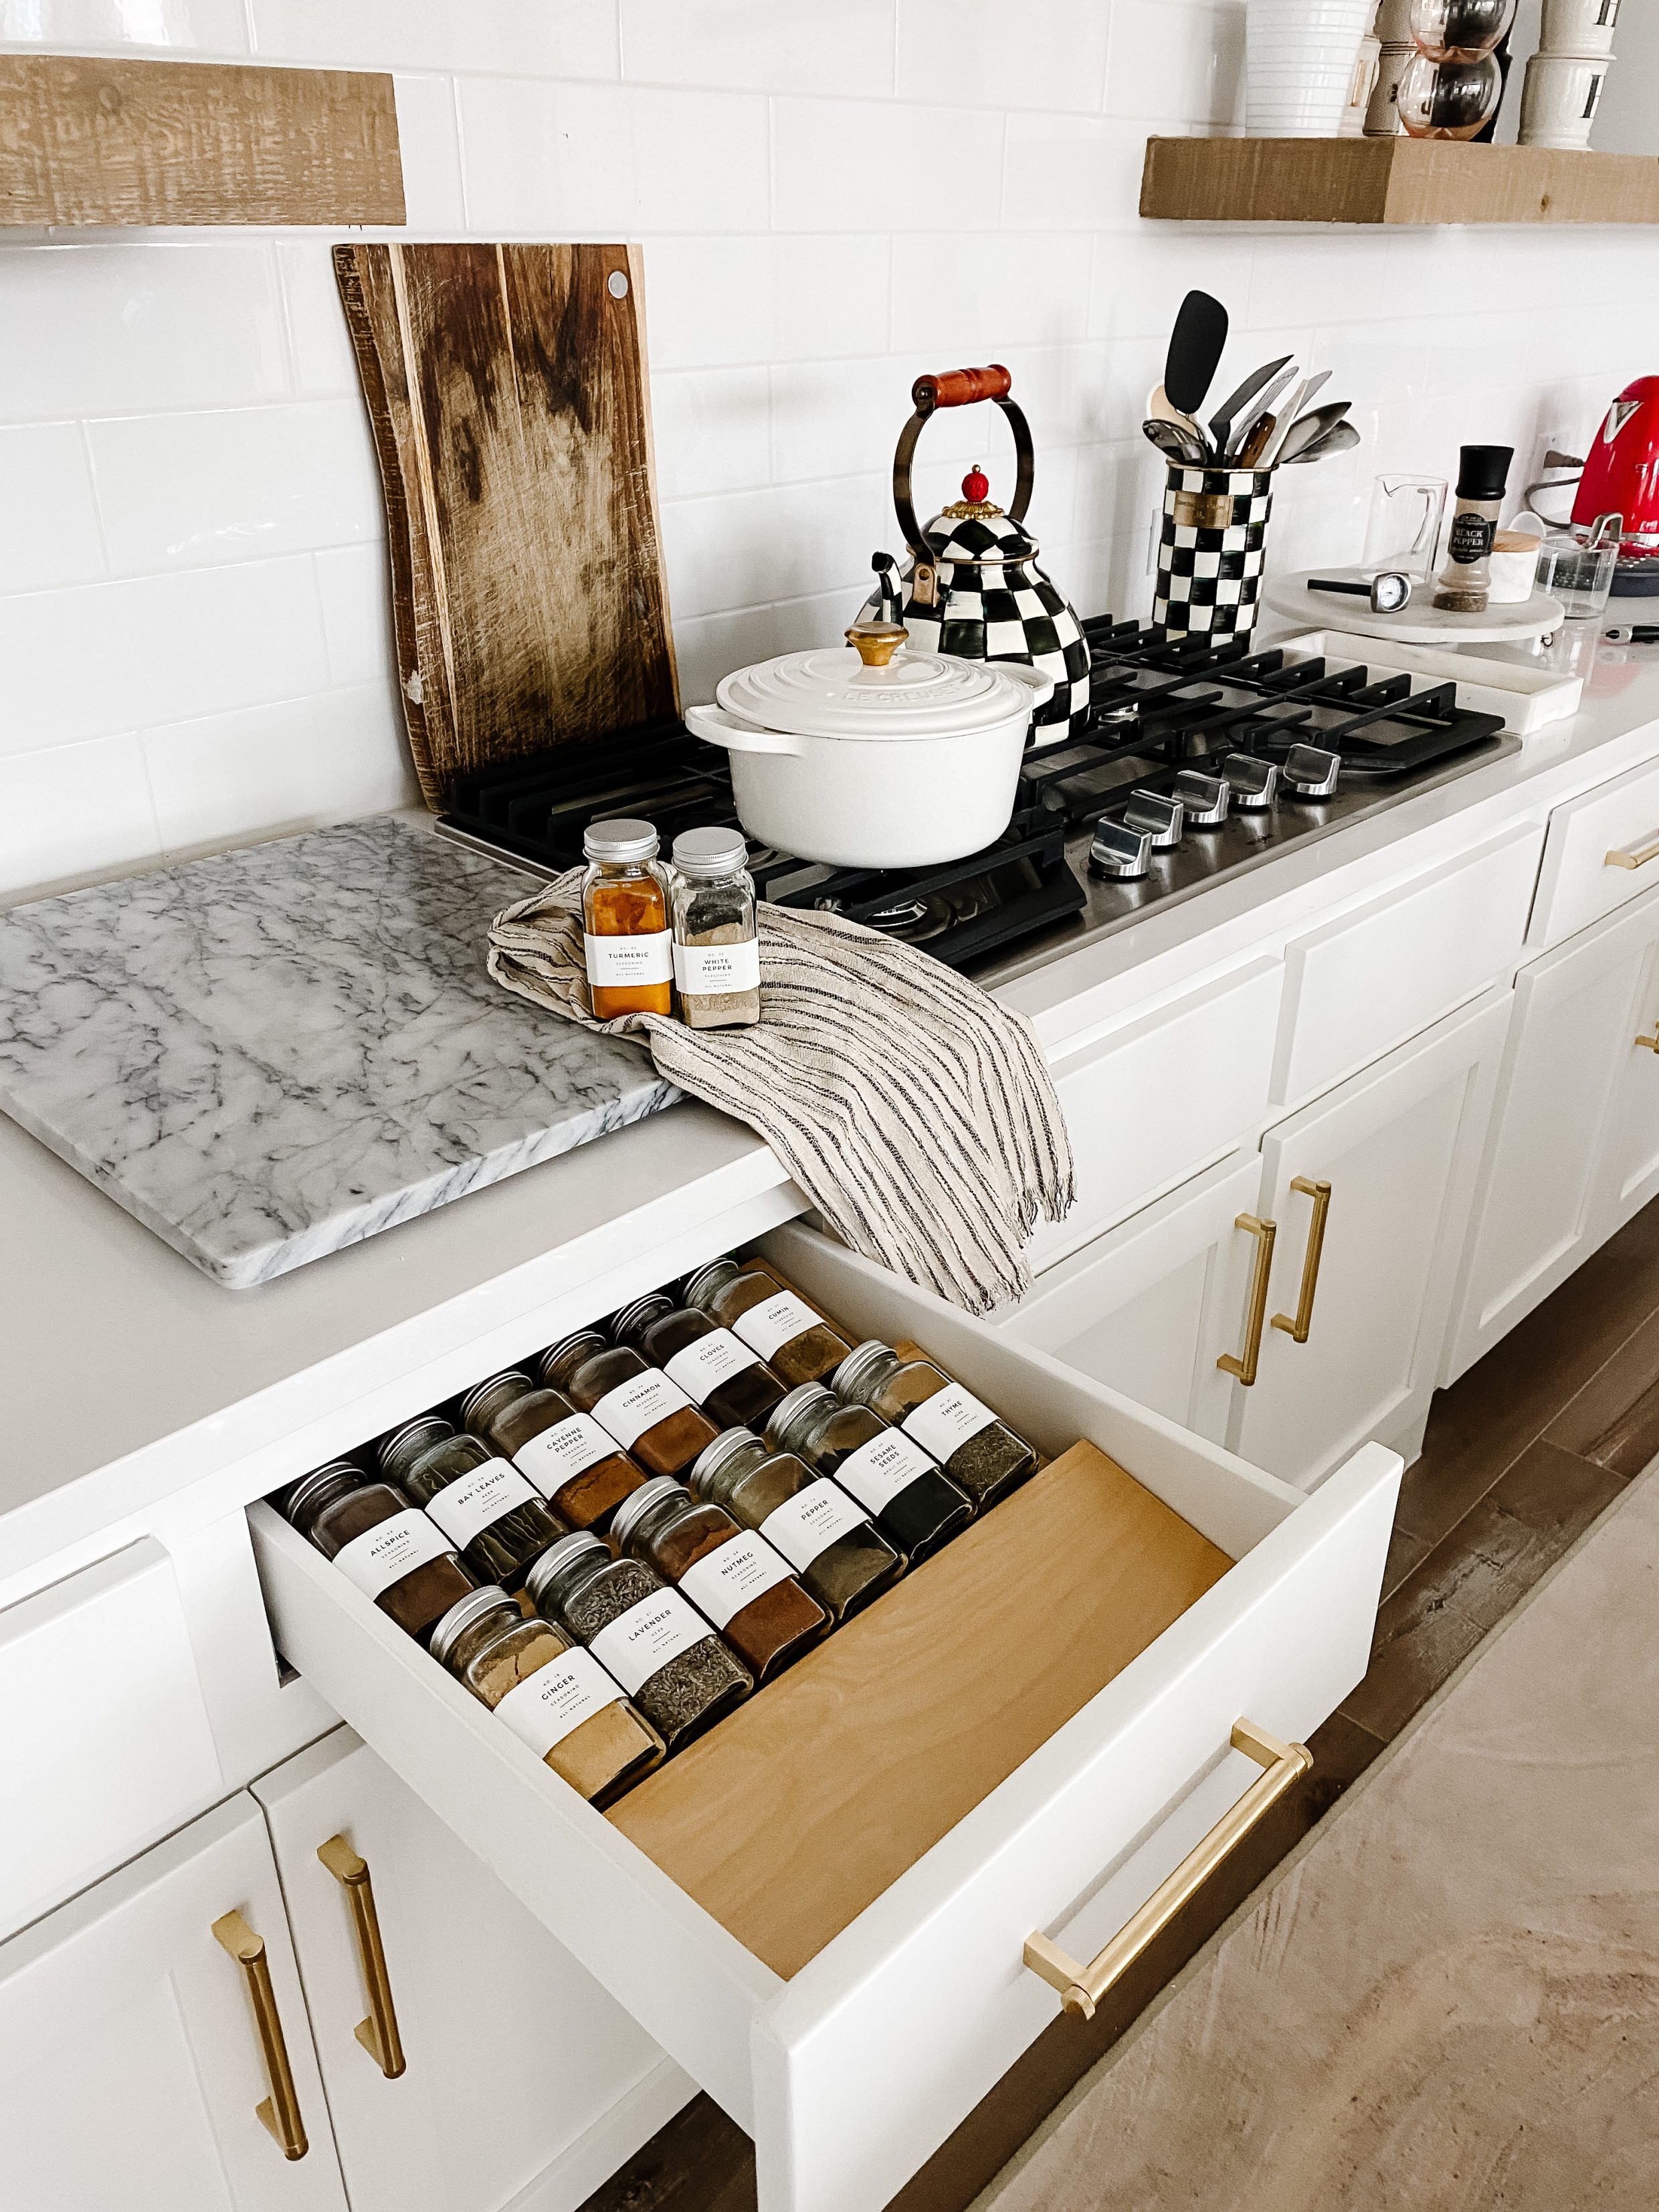 Spice drawer insert with white modern spice labels, Ruggable runner, Le Creuset dutch oven, MacKenzie-Childs kettle and gas cooktop in a transitional kitchen